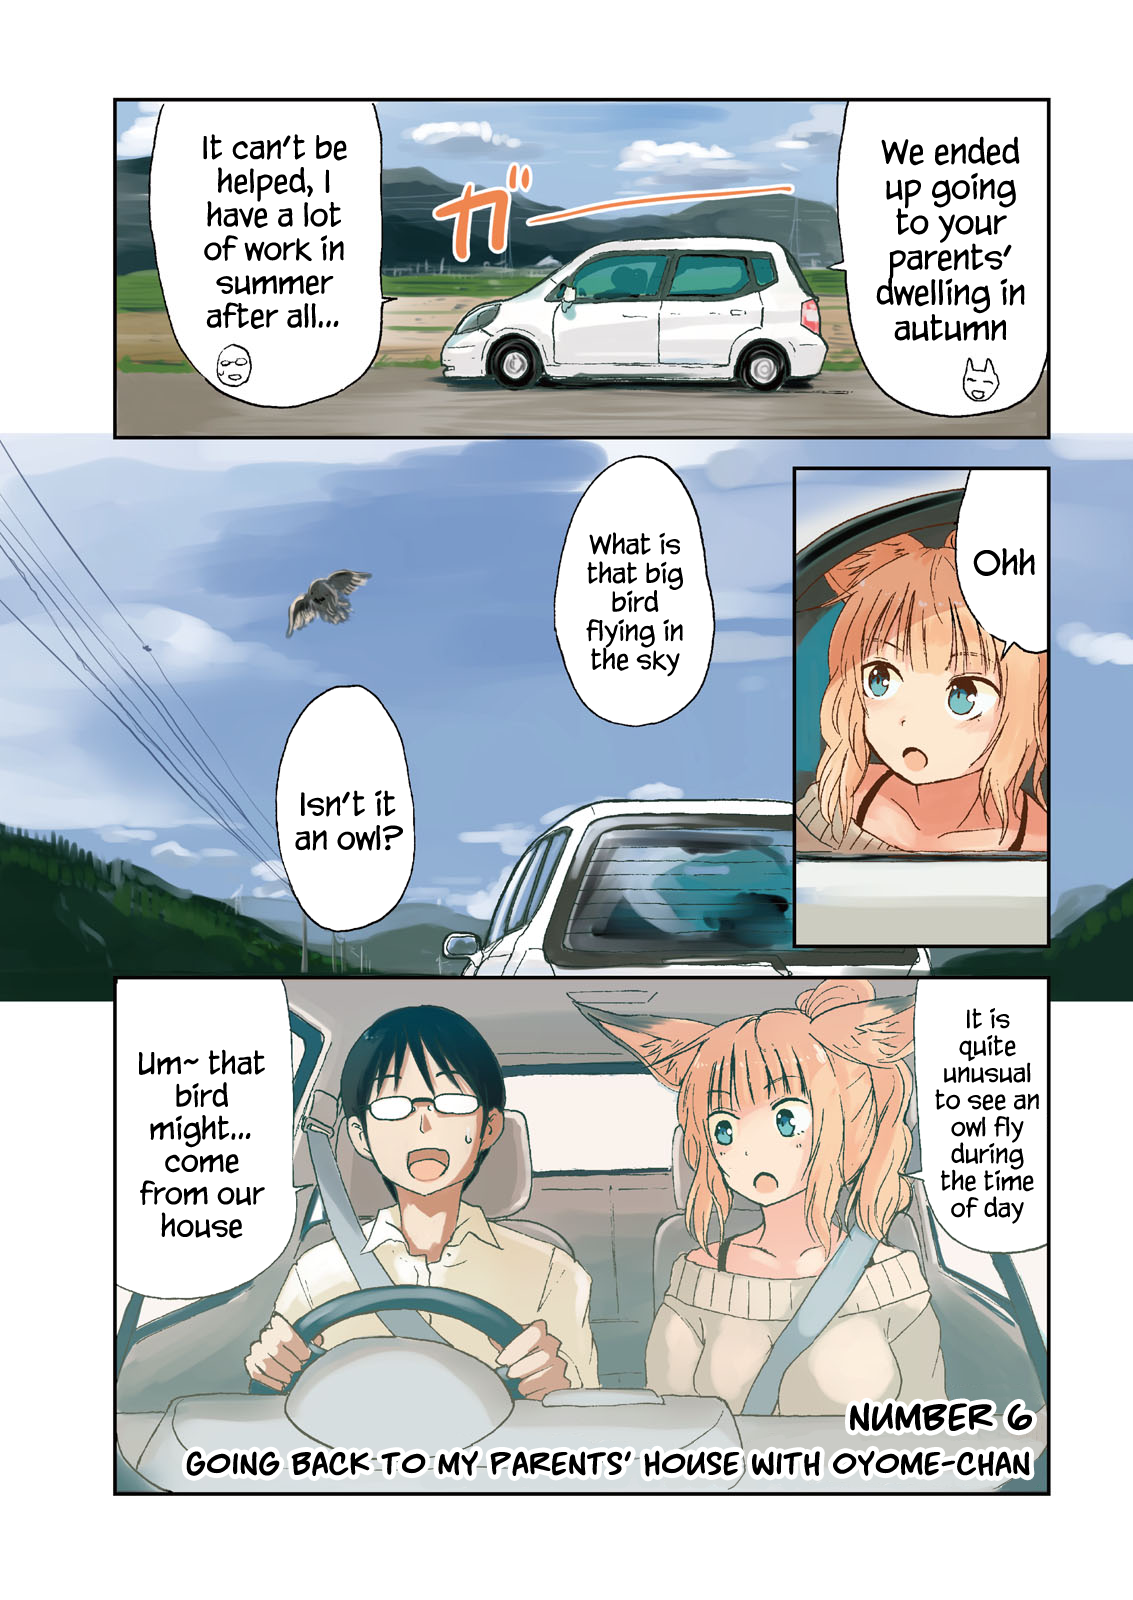 Kitsune No Oyome-Chan Vol.1 Chapter 6: Going Back To My Parents’ House With Oyome-Chan - Picture 1